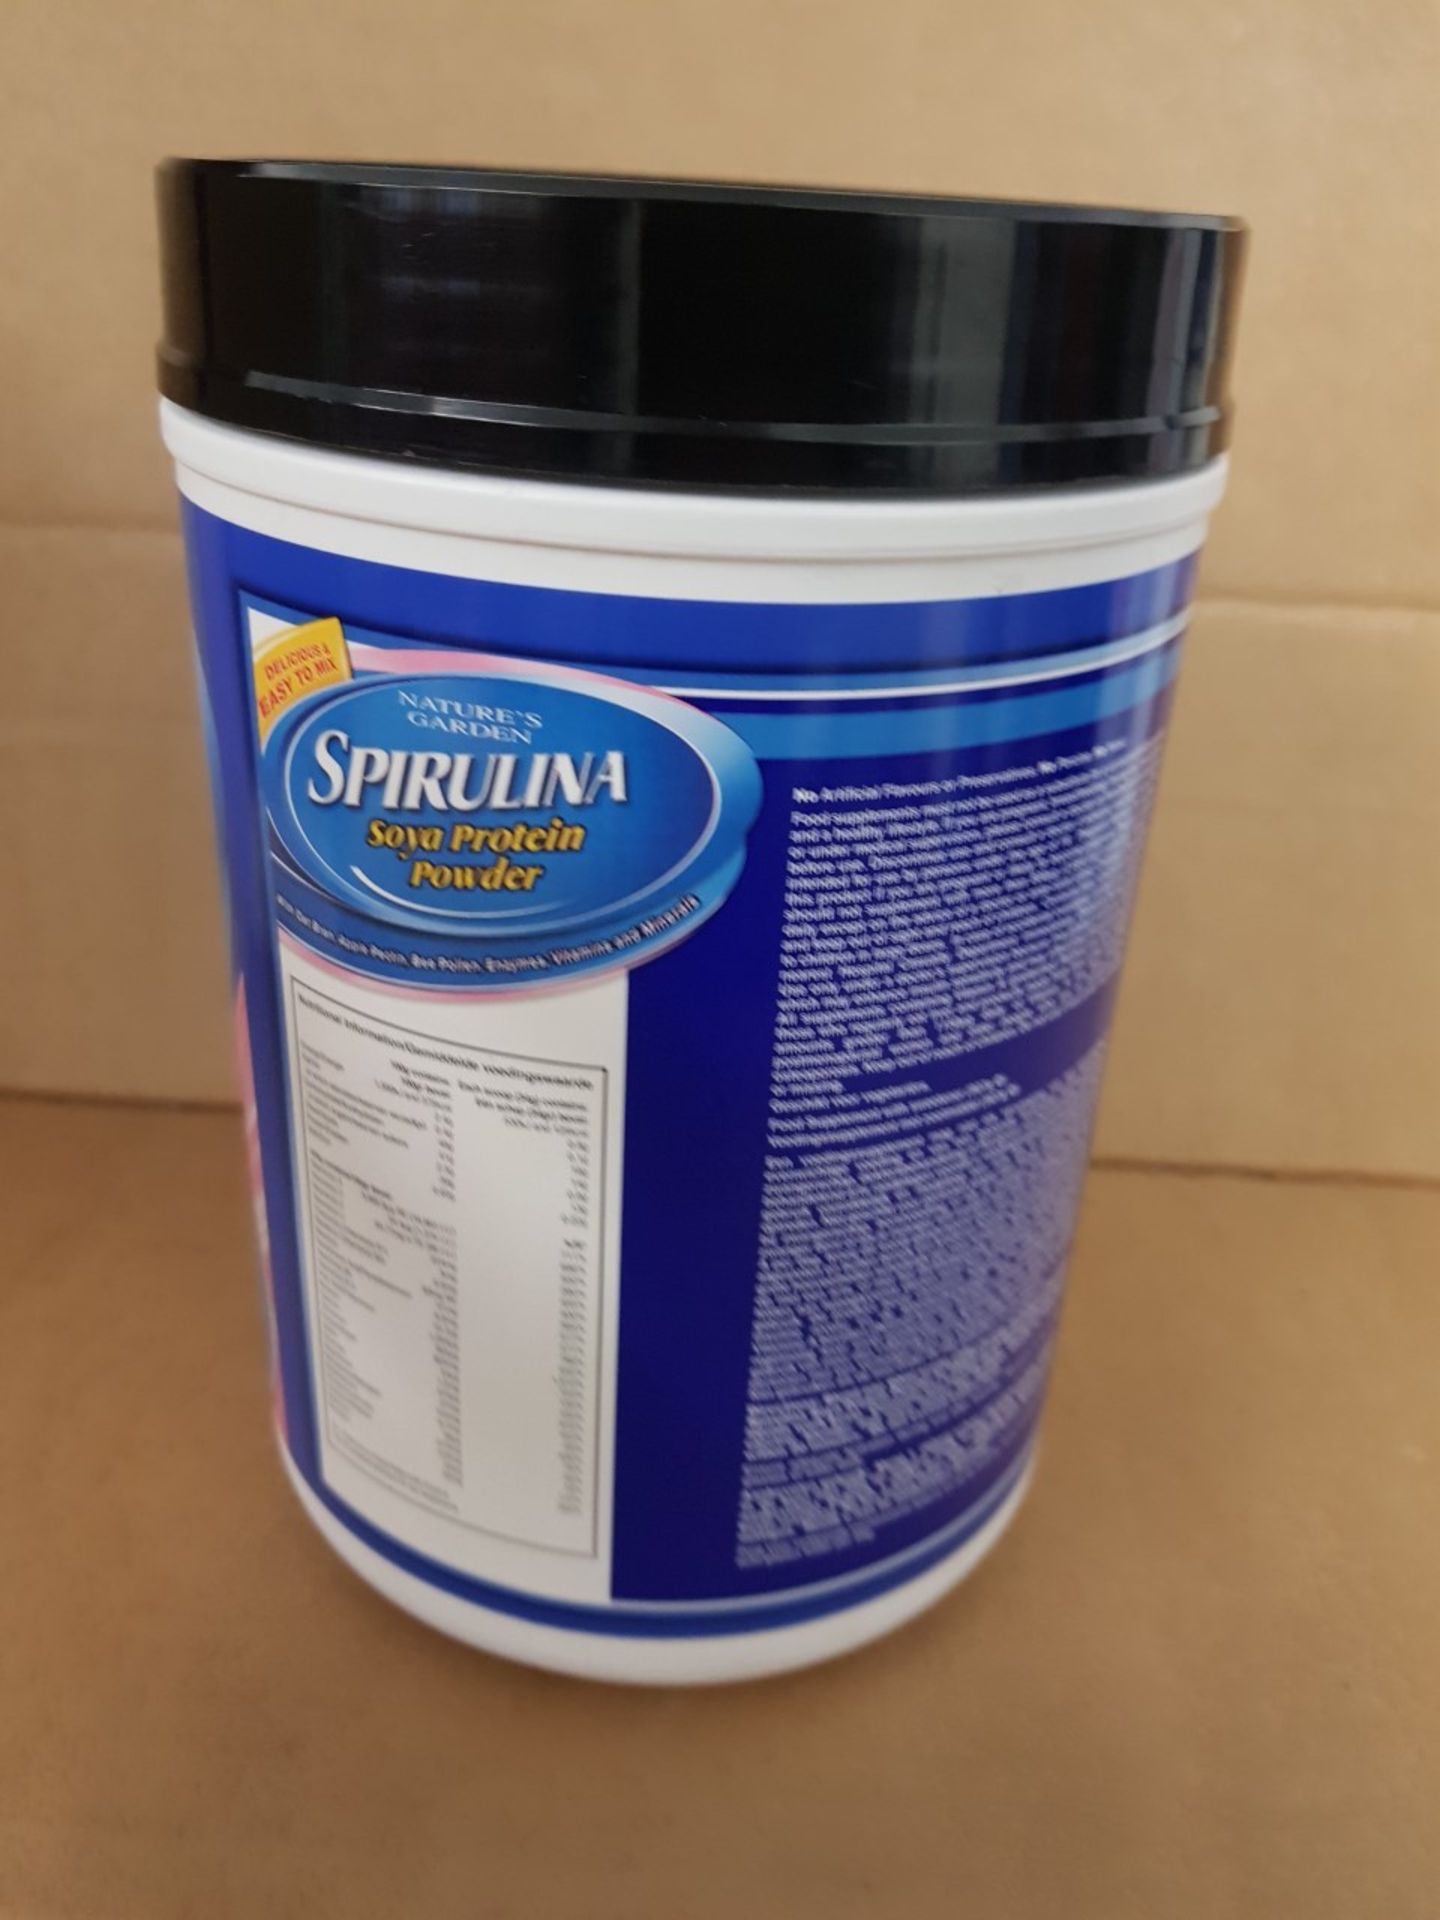 PALLET OF 160 x NEW & SEALED 907G Tubs of Nature's Garden Spirulina - Soya Protein Powder. Makes - Image 7 of 10